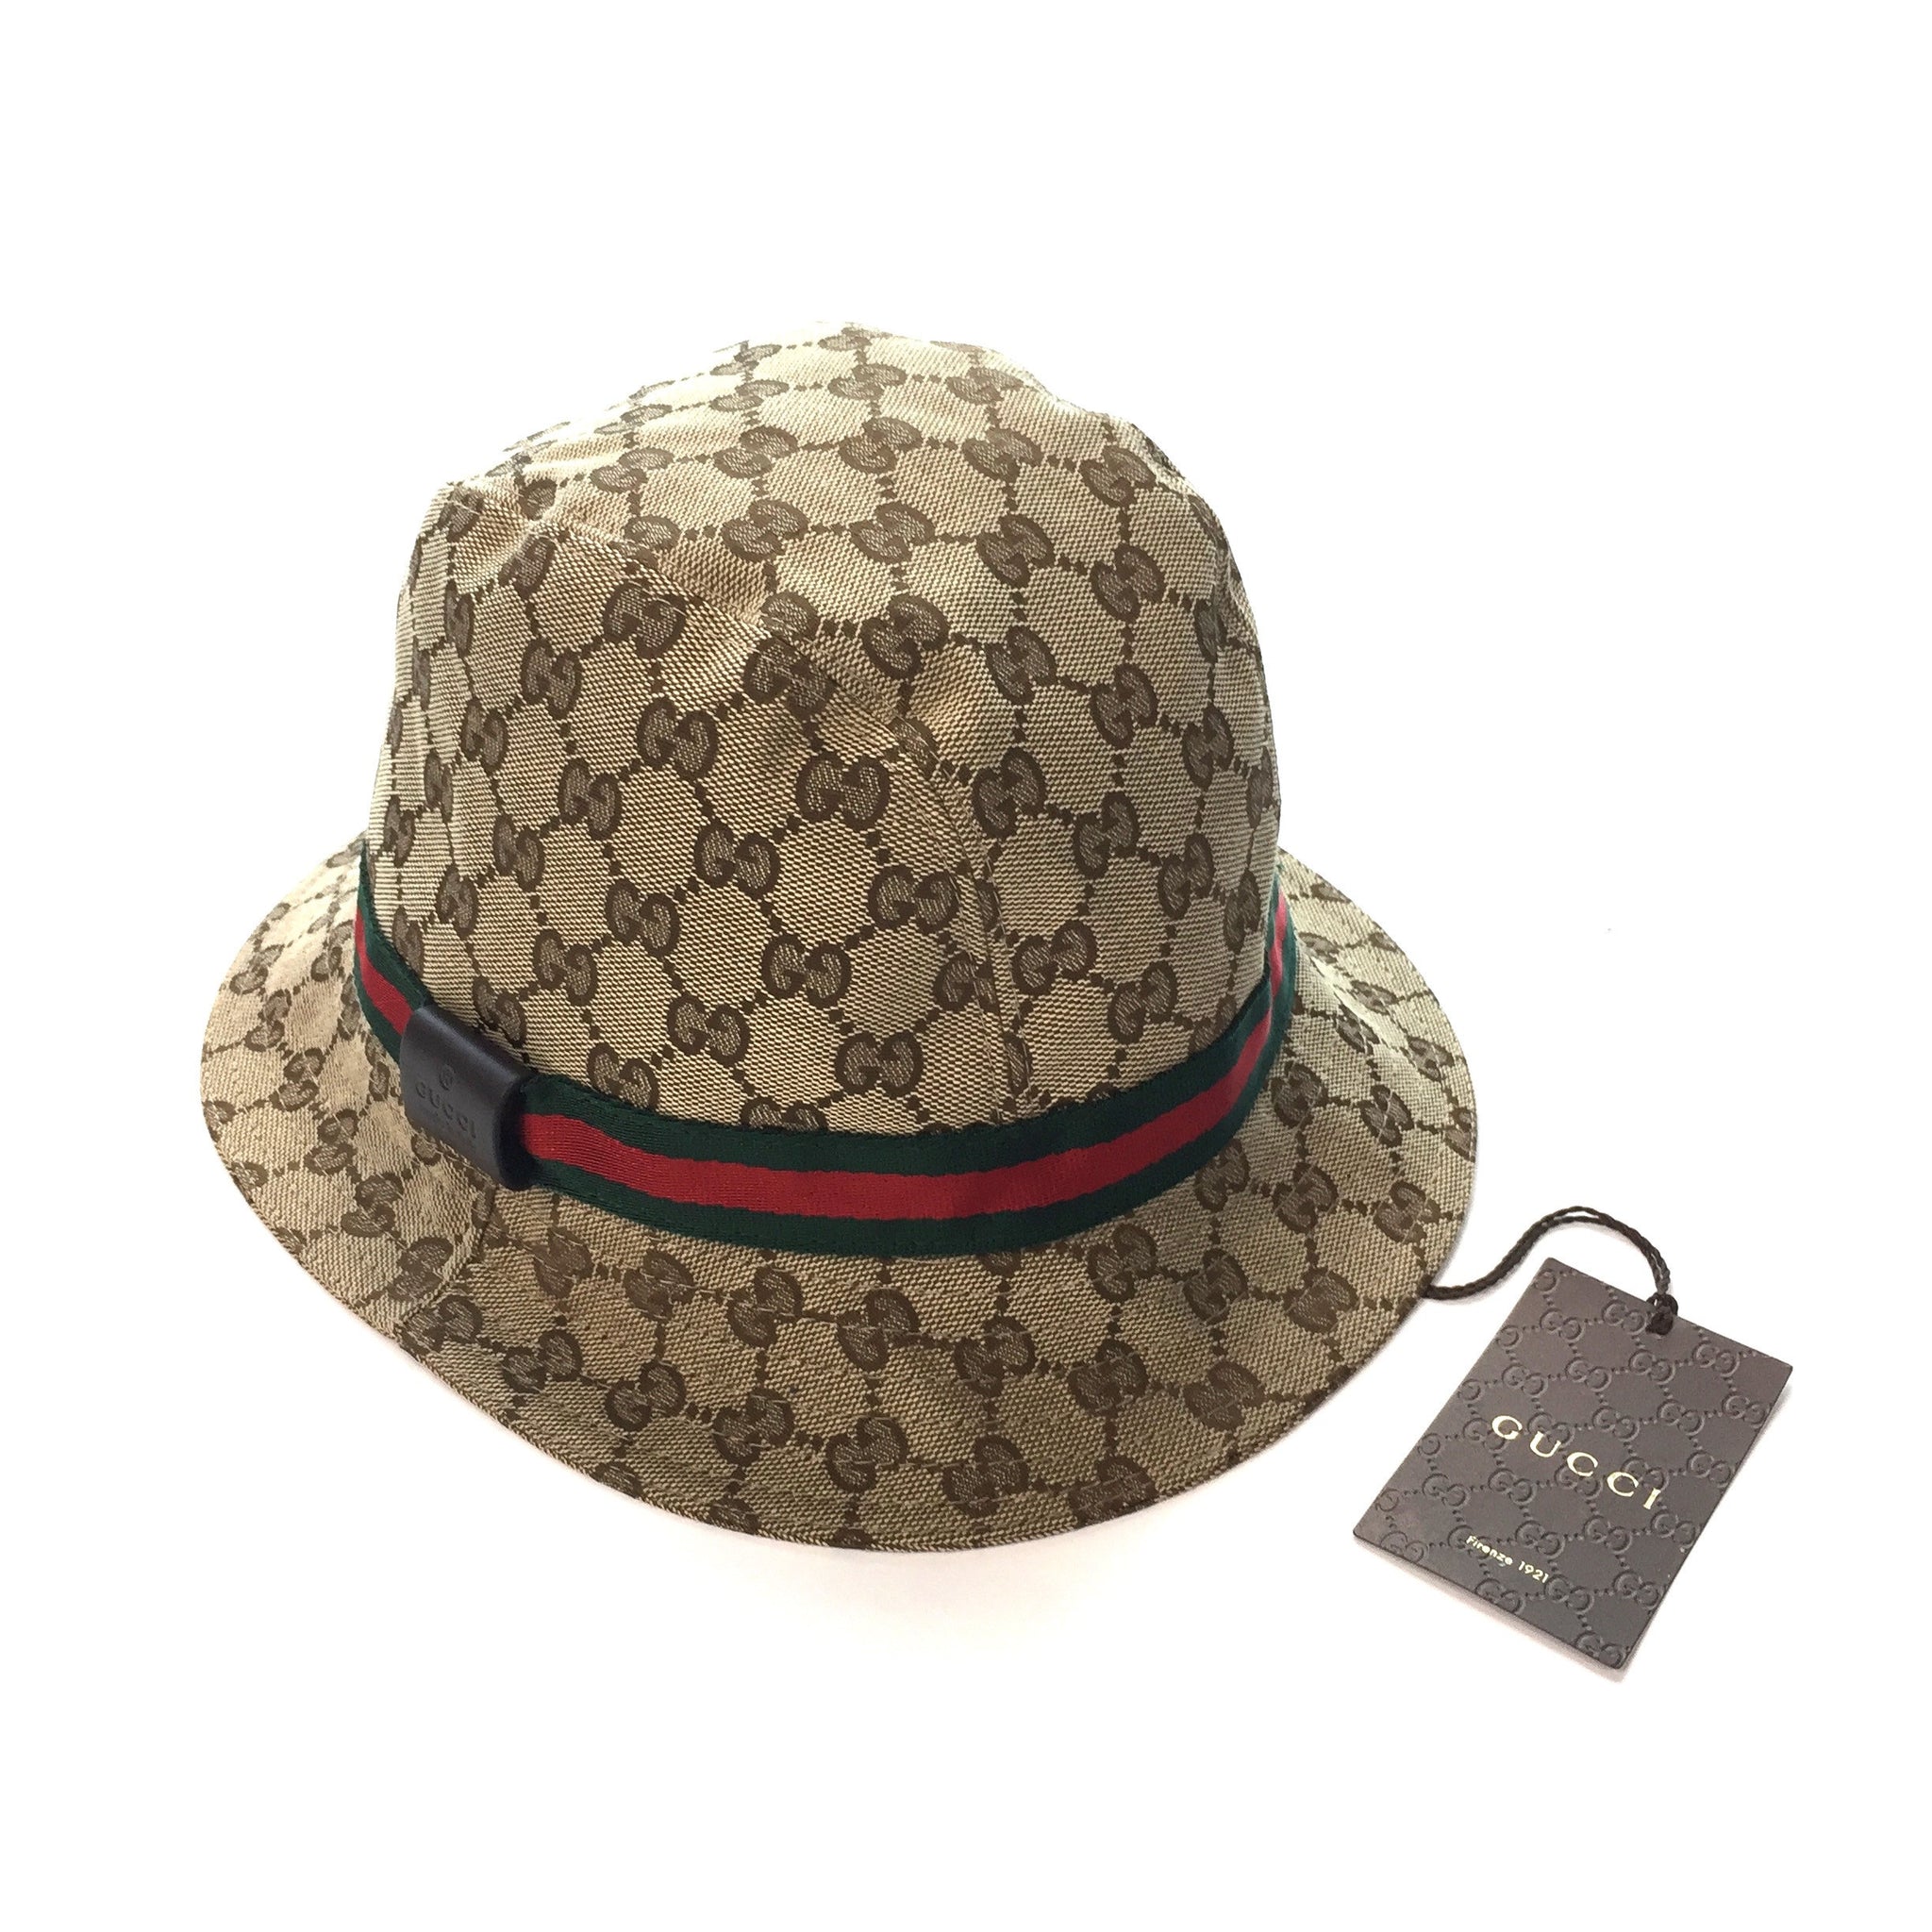 authentic gucci bucket hat